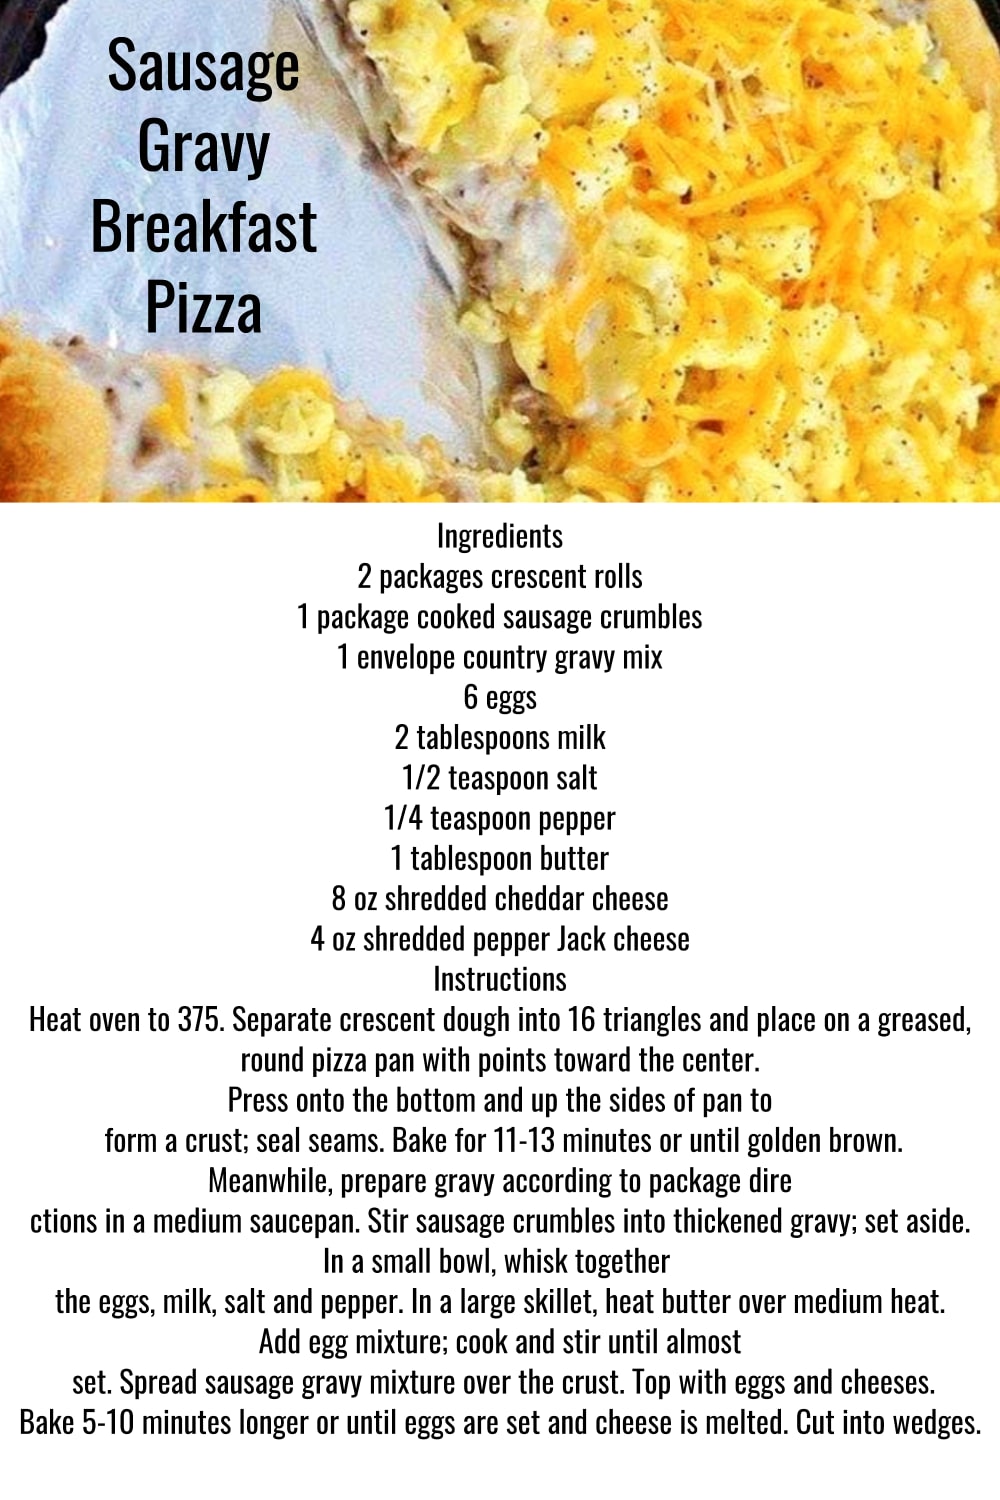 Breakfast ideas for a crowd - easy bkreakfast PIZZA recipe with crescent rolls, pre-cooked sausage crumbles, eggs and cheese. So easy and so good! I make it for Christmas breakfast every year.